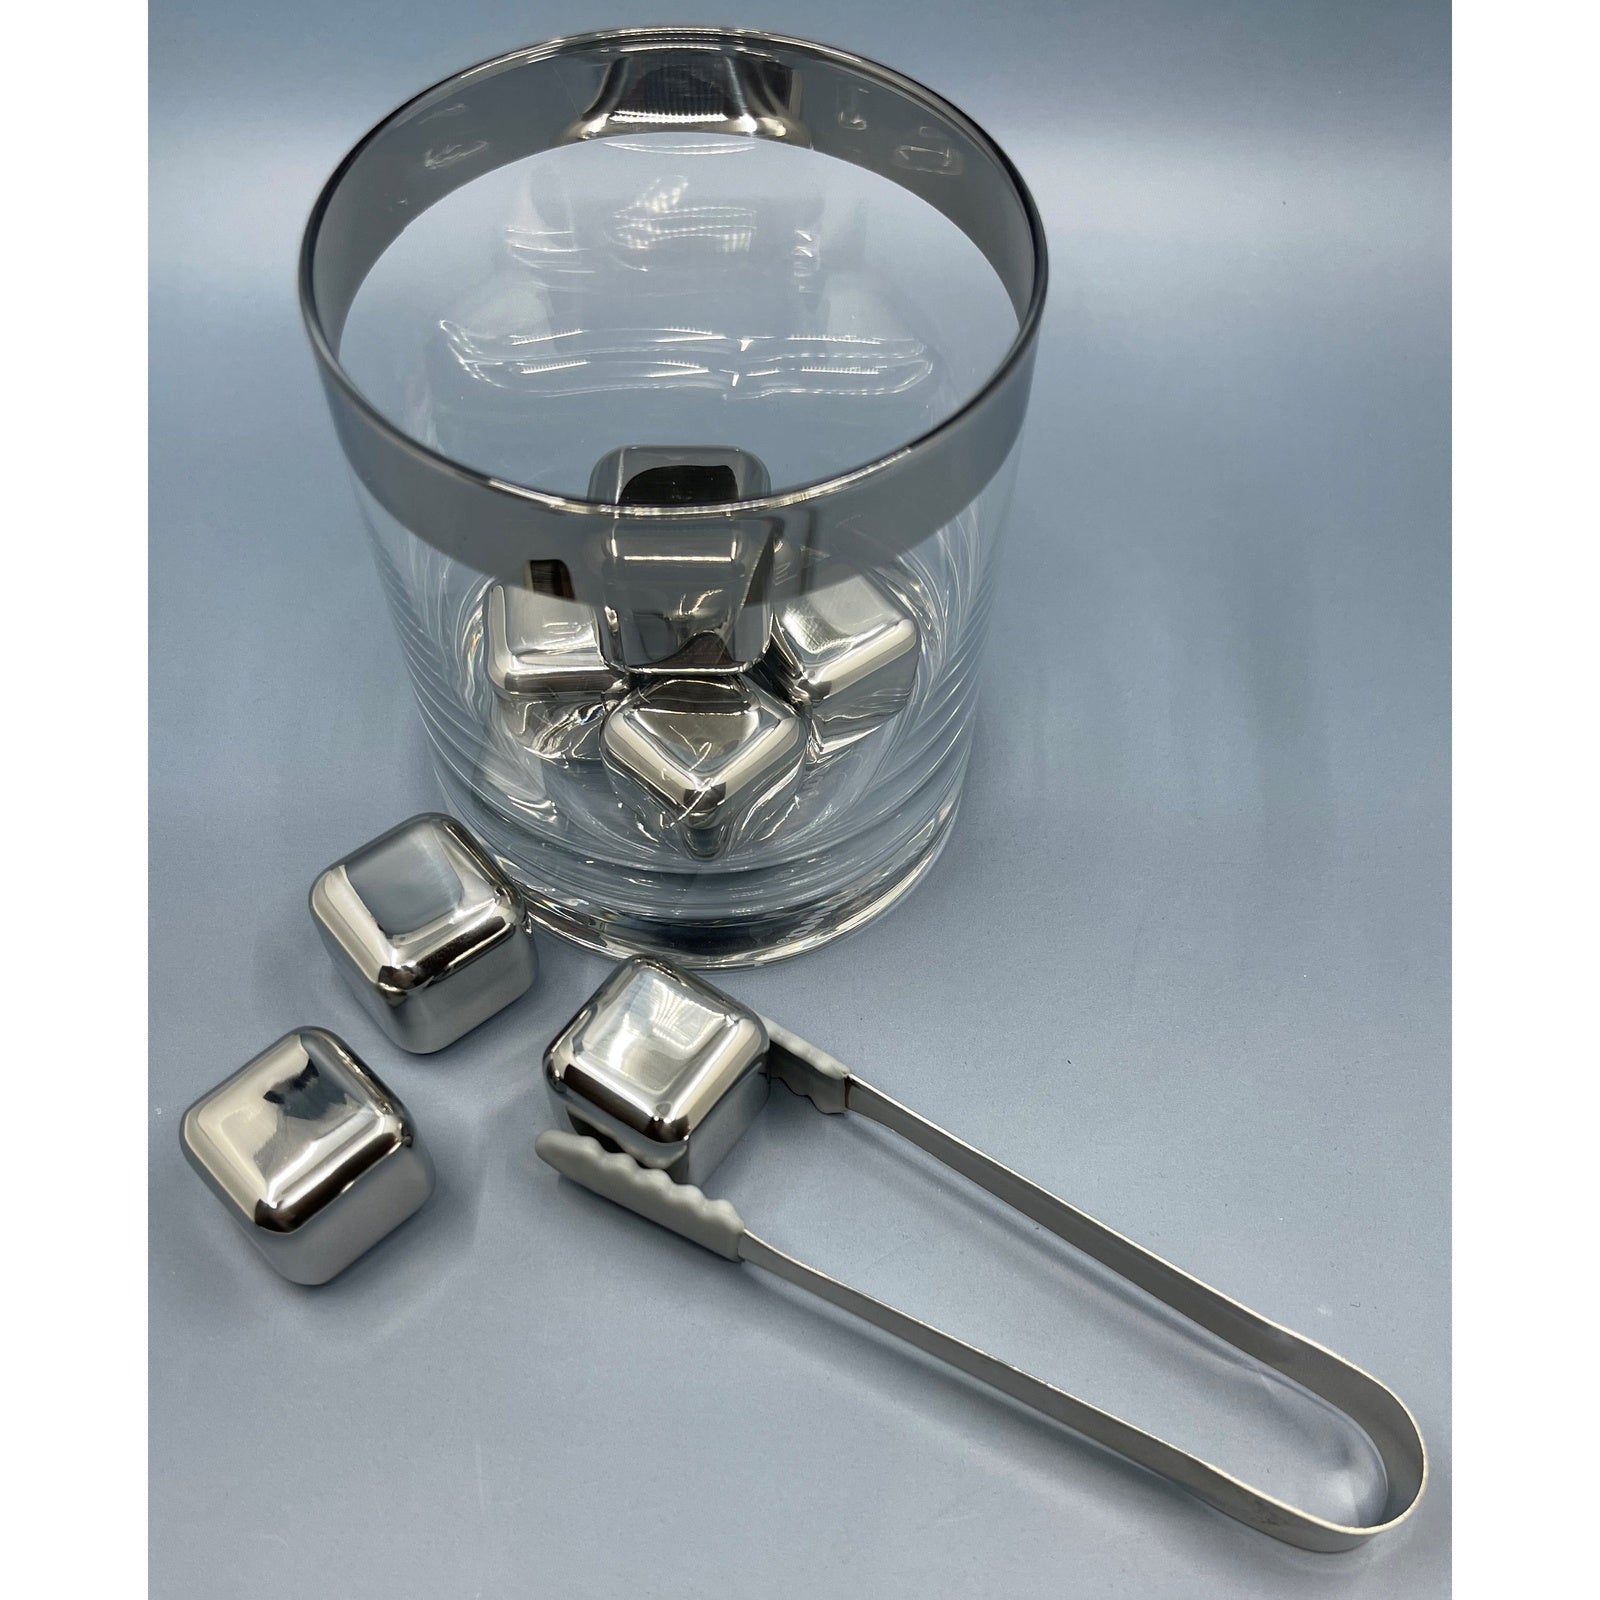 Stainless Steel whiskey chilling ice cubes 8 cube set